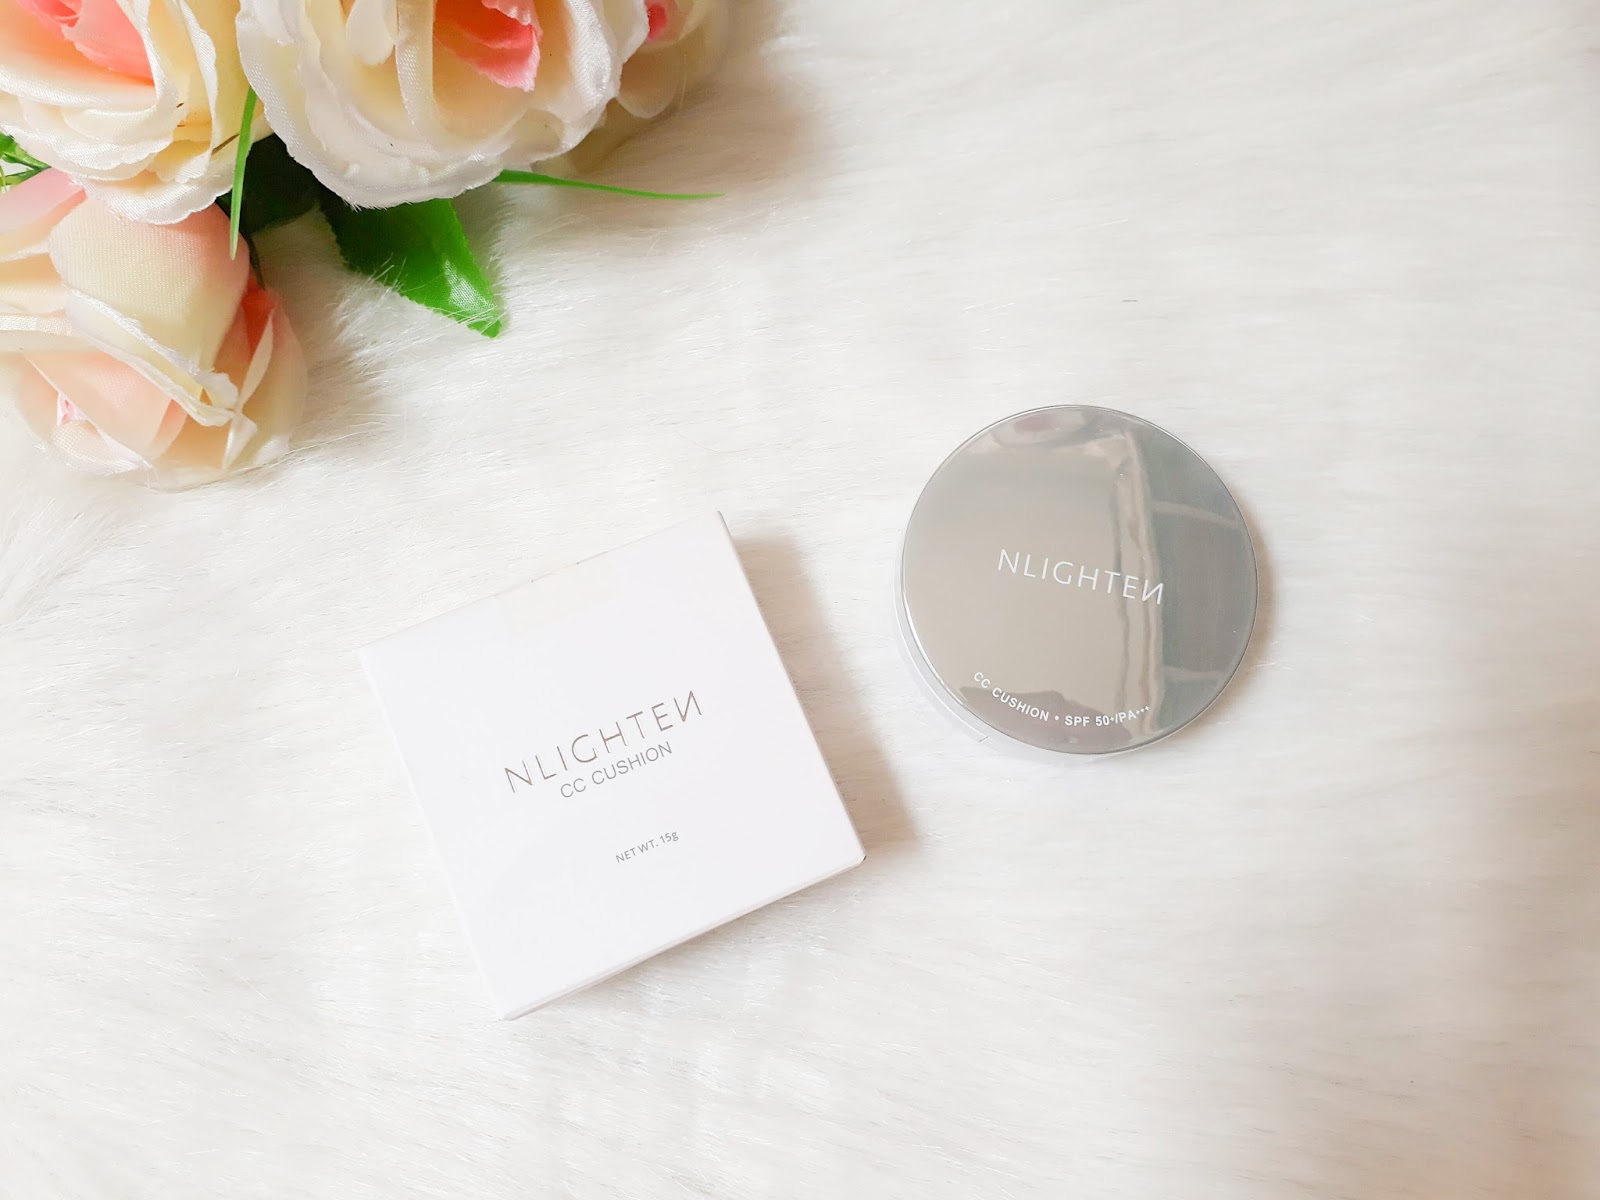 NLighten CC Cushion - Review — Sweet Confessions